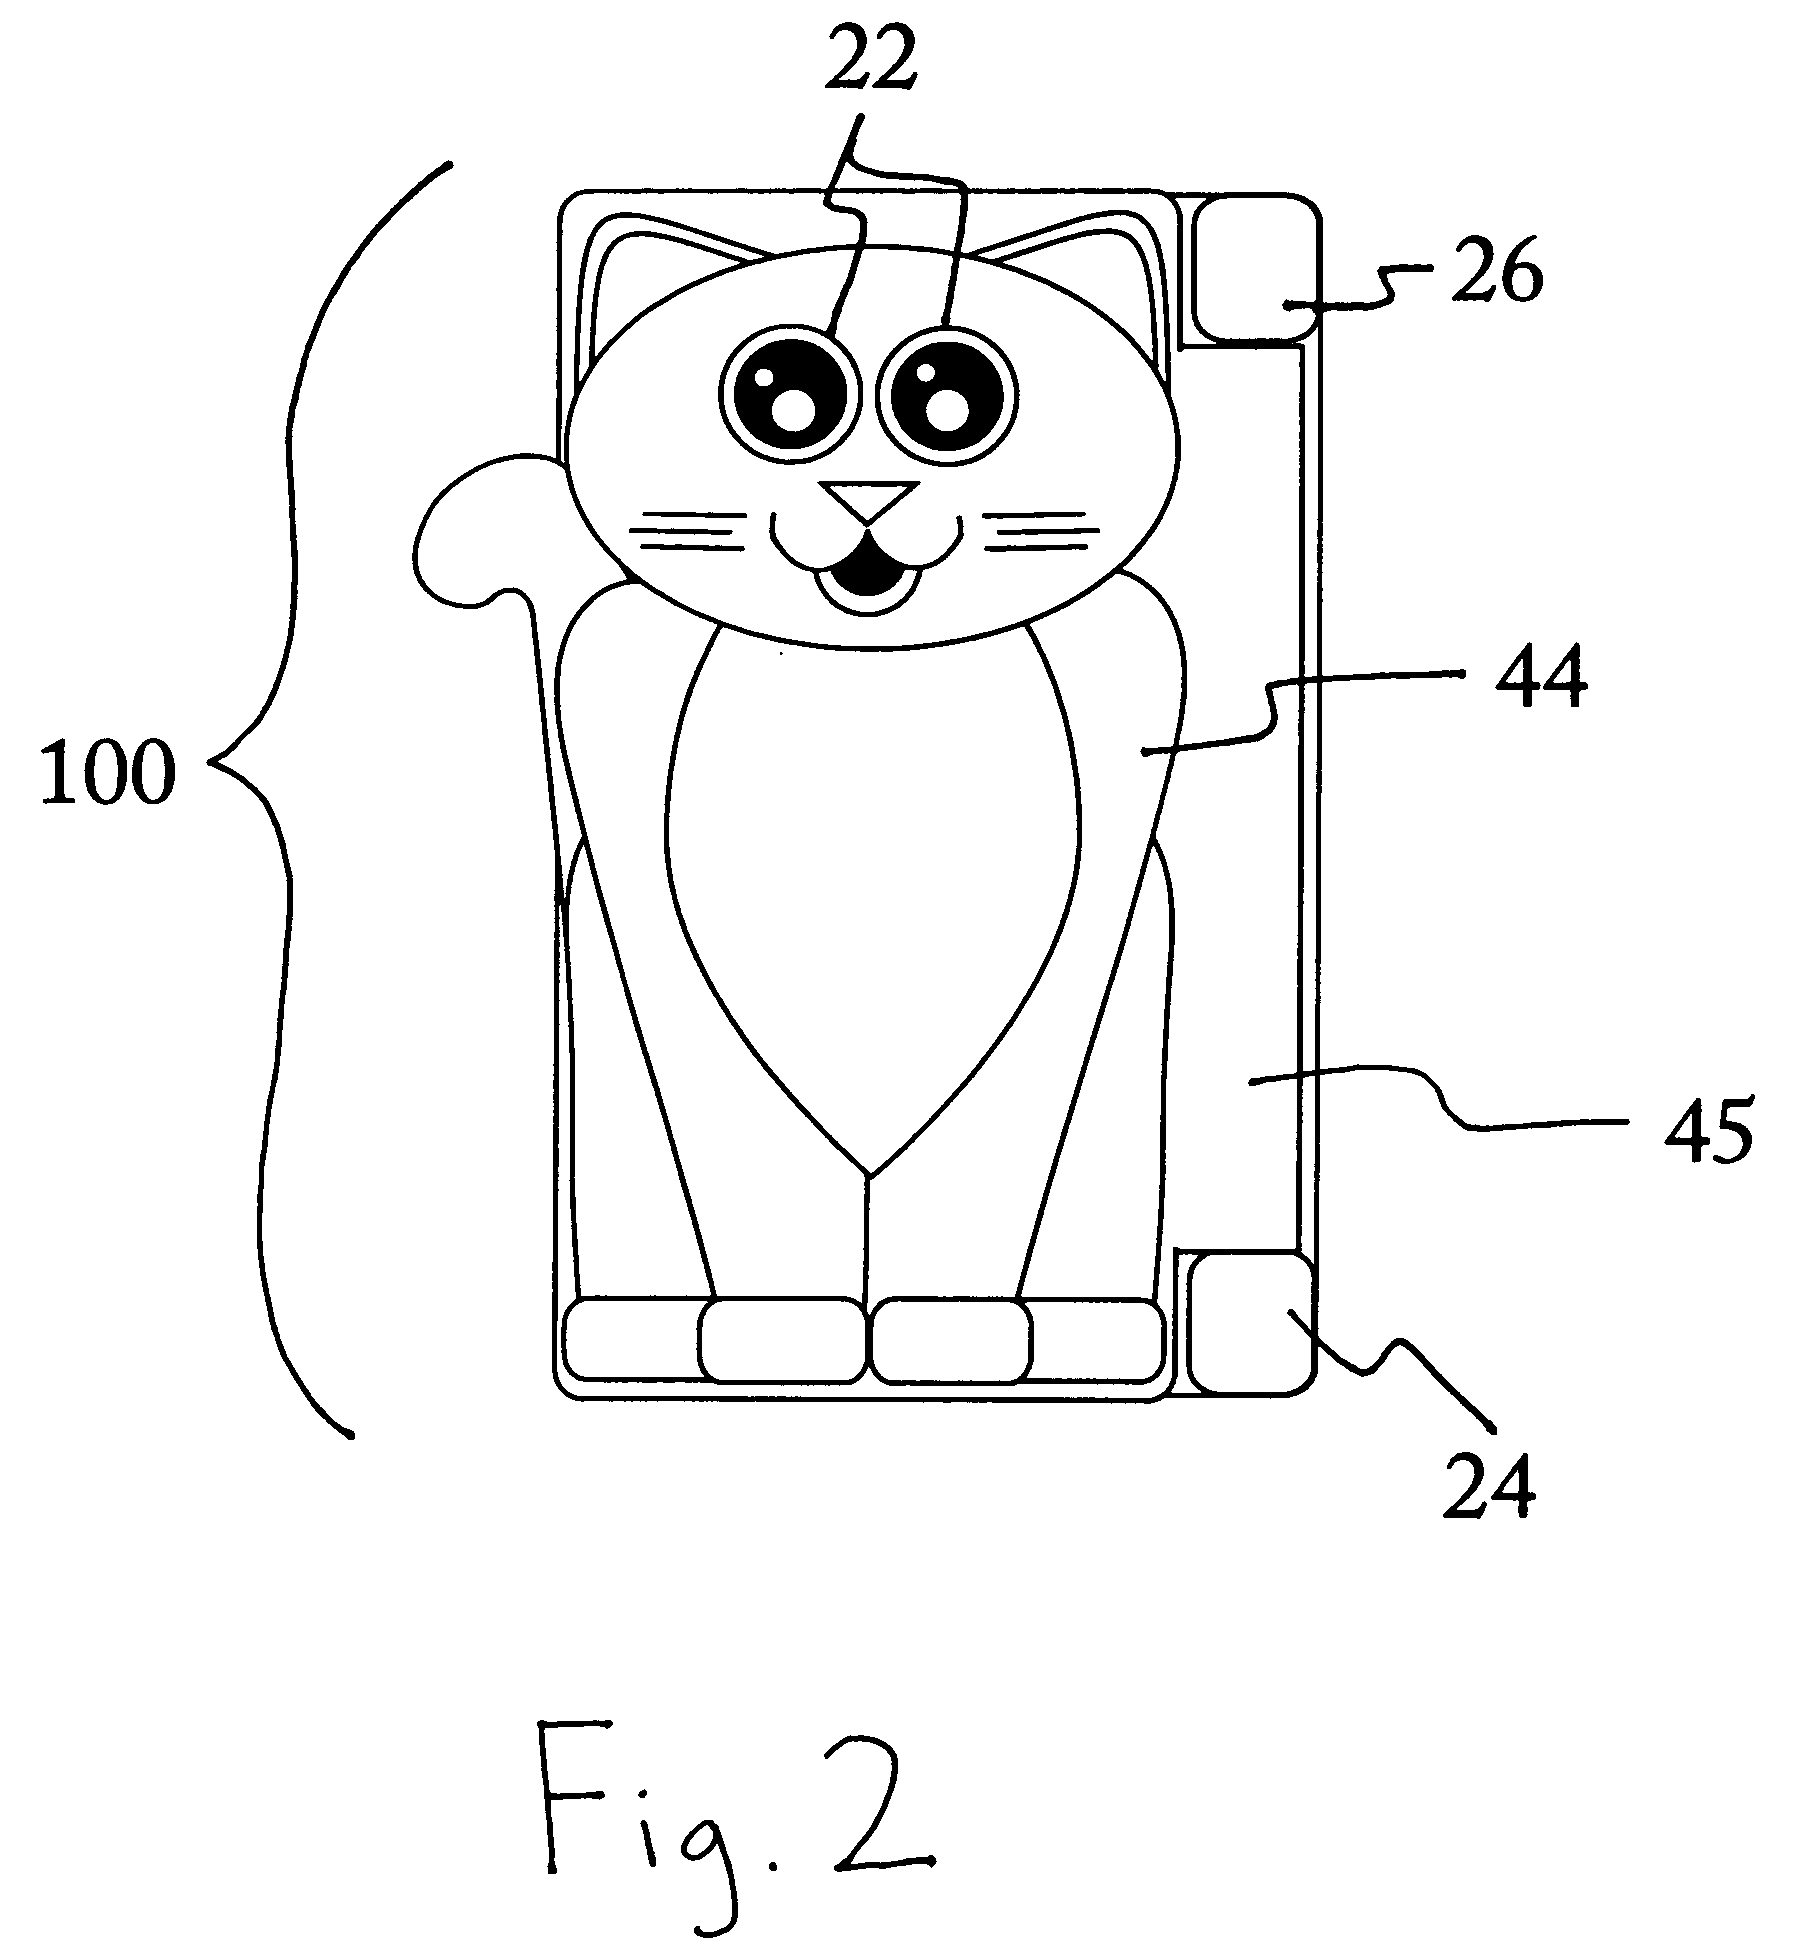 Method for tracking and rewarding a child's exercise activity by use of a pedometer and computer interface